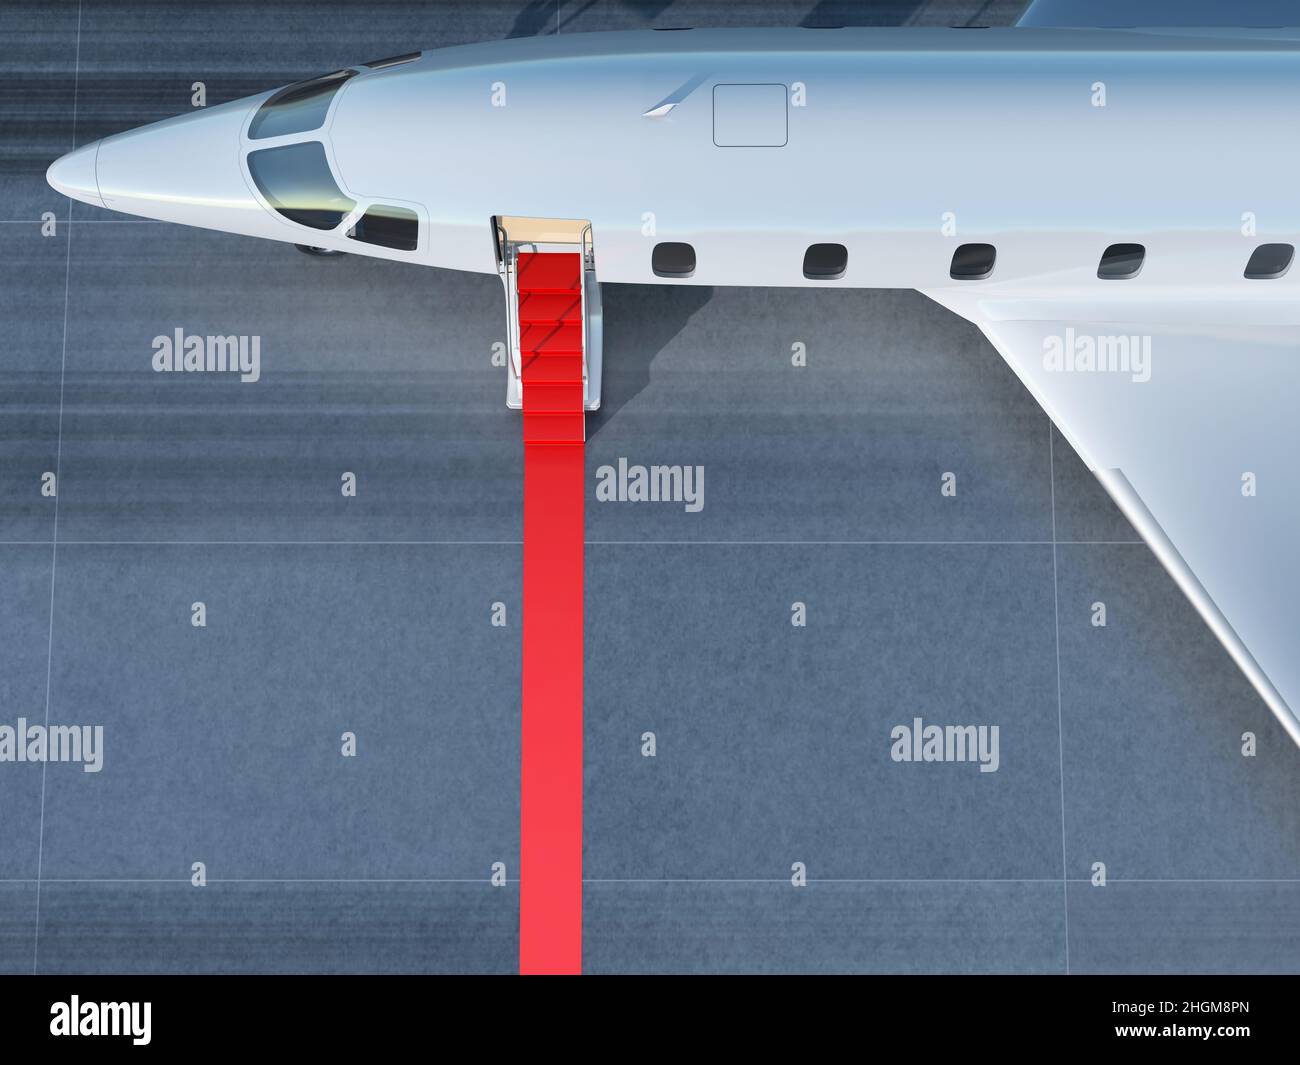 Red carpet leading to a business jet entrance, illustration Stock Photo